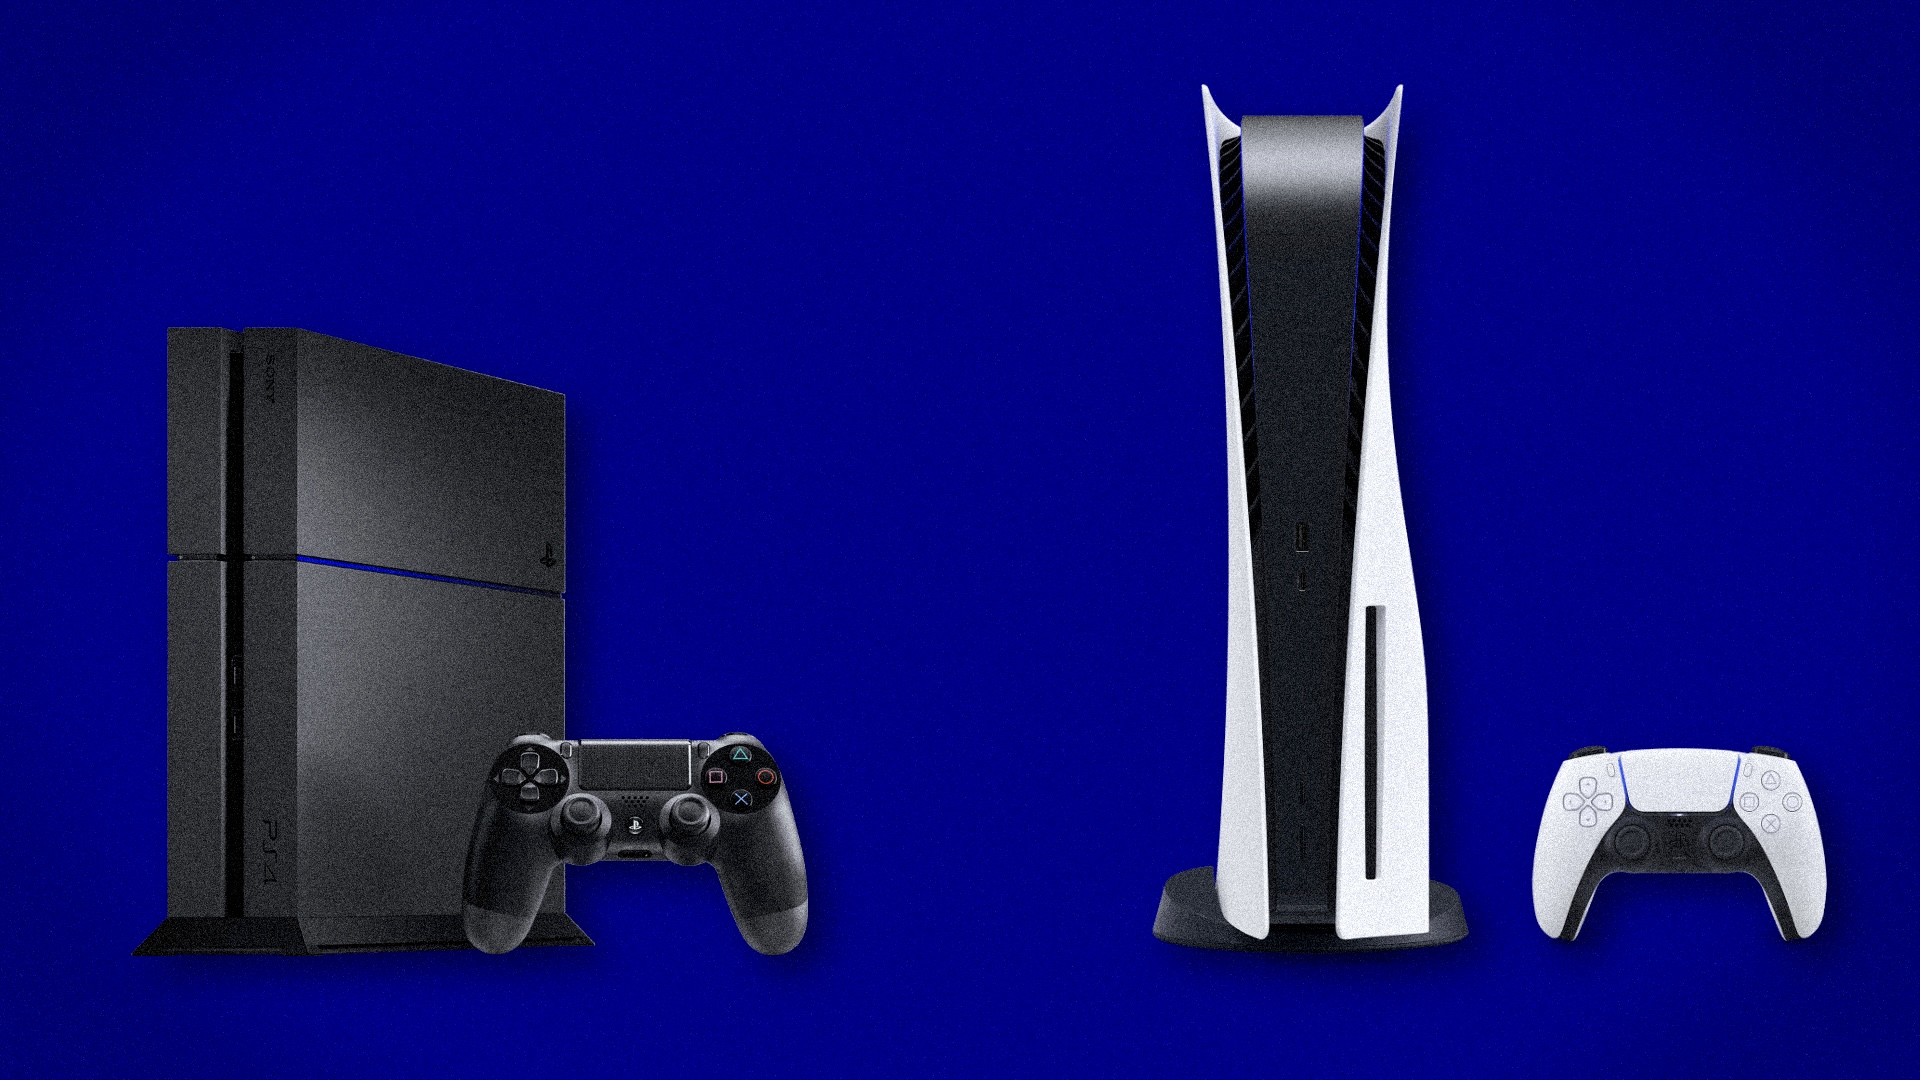 ps4s sold to date